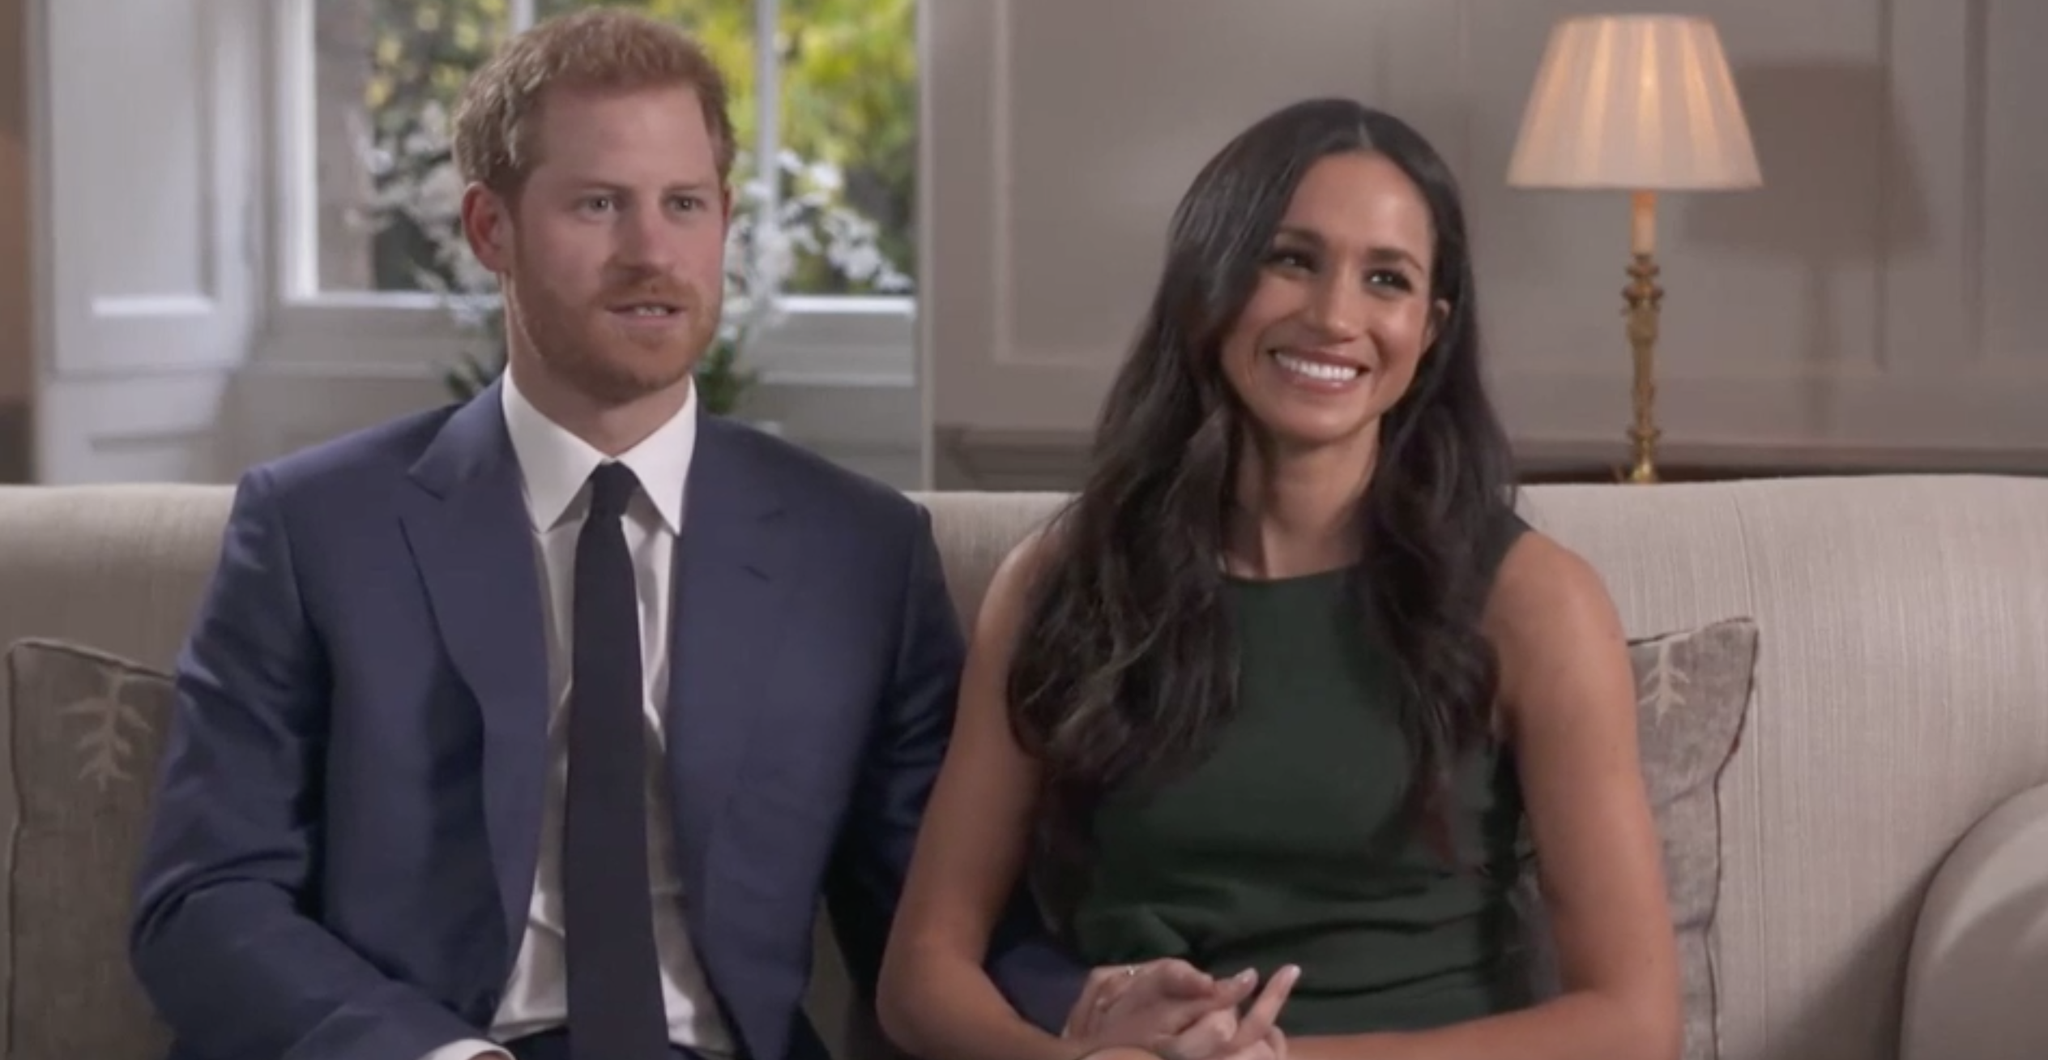 Prince Harry and Meghan Markle's first interview